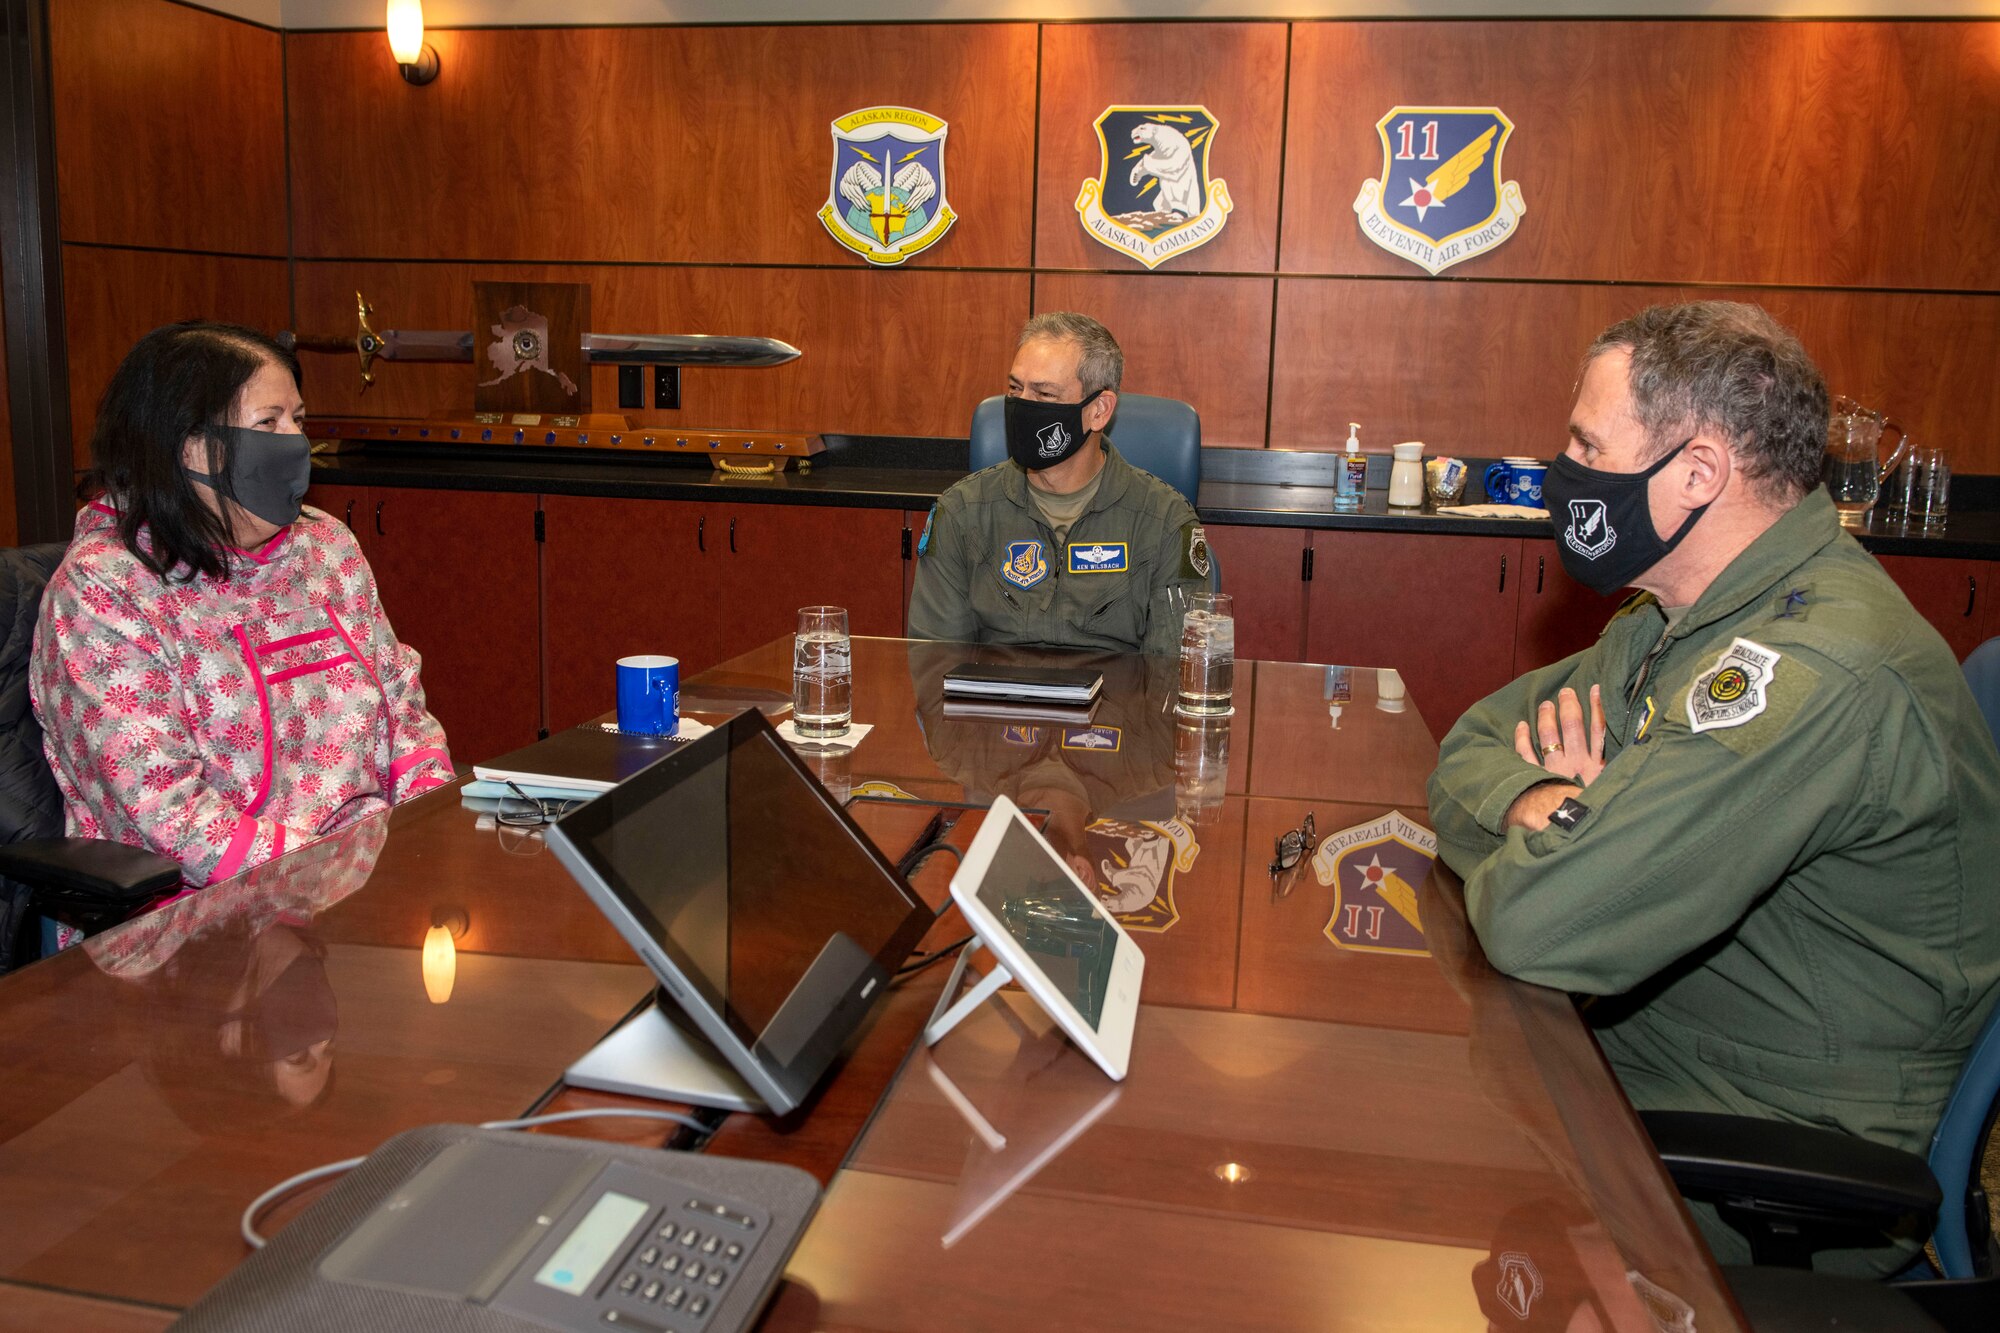 U.S. Air Force Gen. Kenneth Wilsbach, center, the Pacific Air Forces commander, talks to Julie Kitka, left, president of the Alaska Federation of Natives, and U.S. Air Force Lt. Gen. David Krumm, right, the Eleventh Air Force commander, about the relationship between the military and the Alaska Native community at Joint Base Elmendorf-Richardson, Alaska, Feb. 16, 2021. PACAF leadership conducted an immersion tour of JBER to learn about the installation's role in readiness and defense in the Arctic as well as how the base remains poised for the future through innovative ideas.